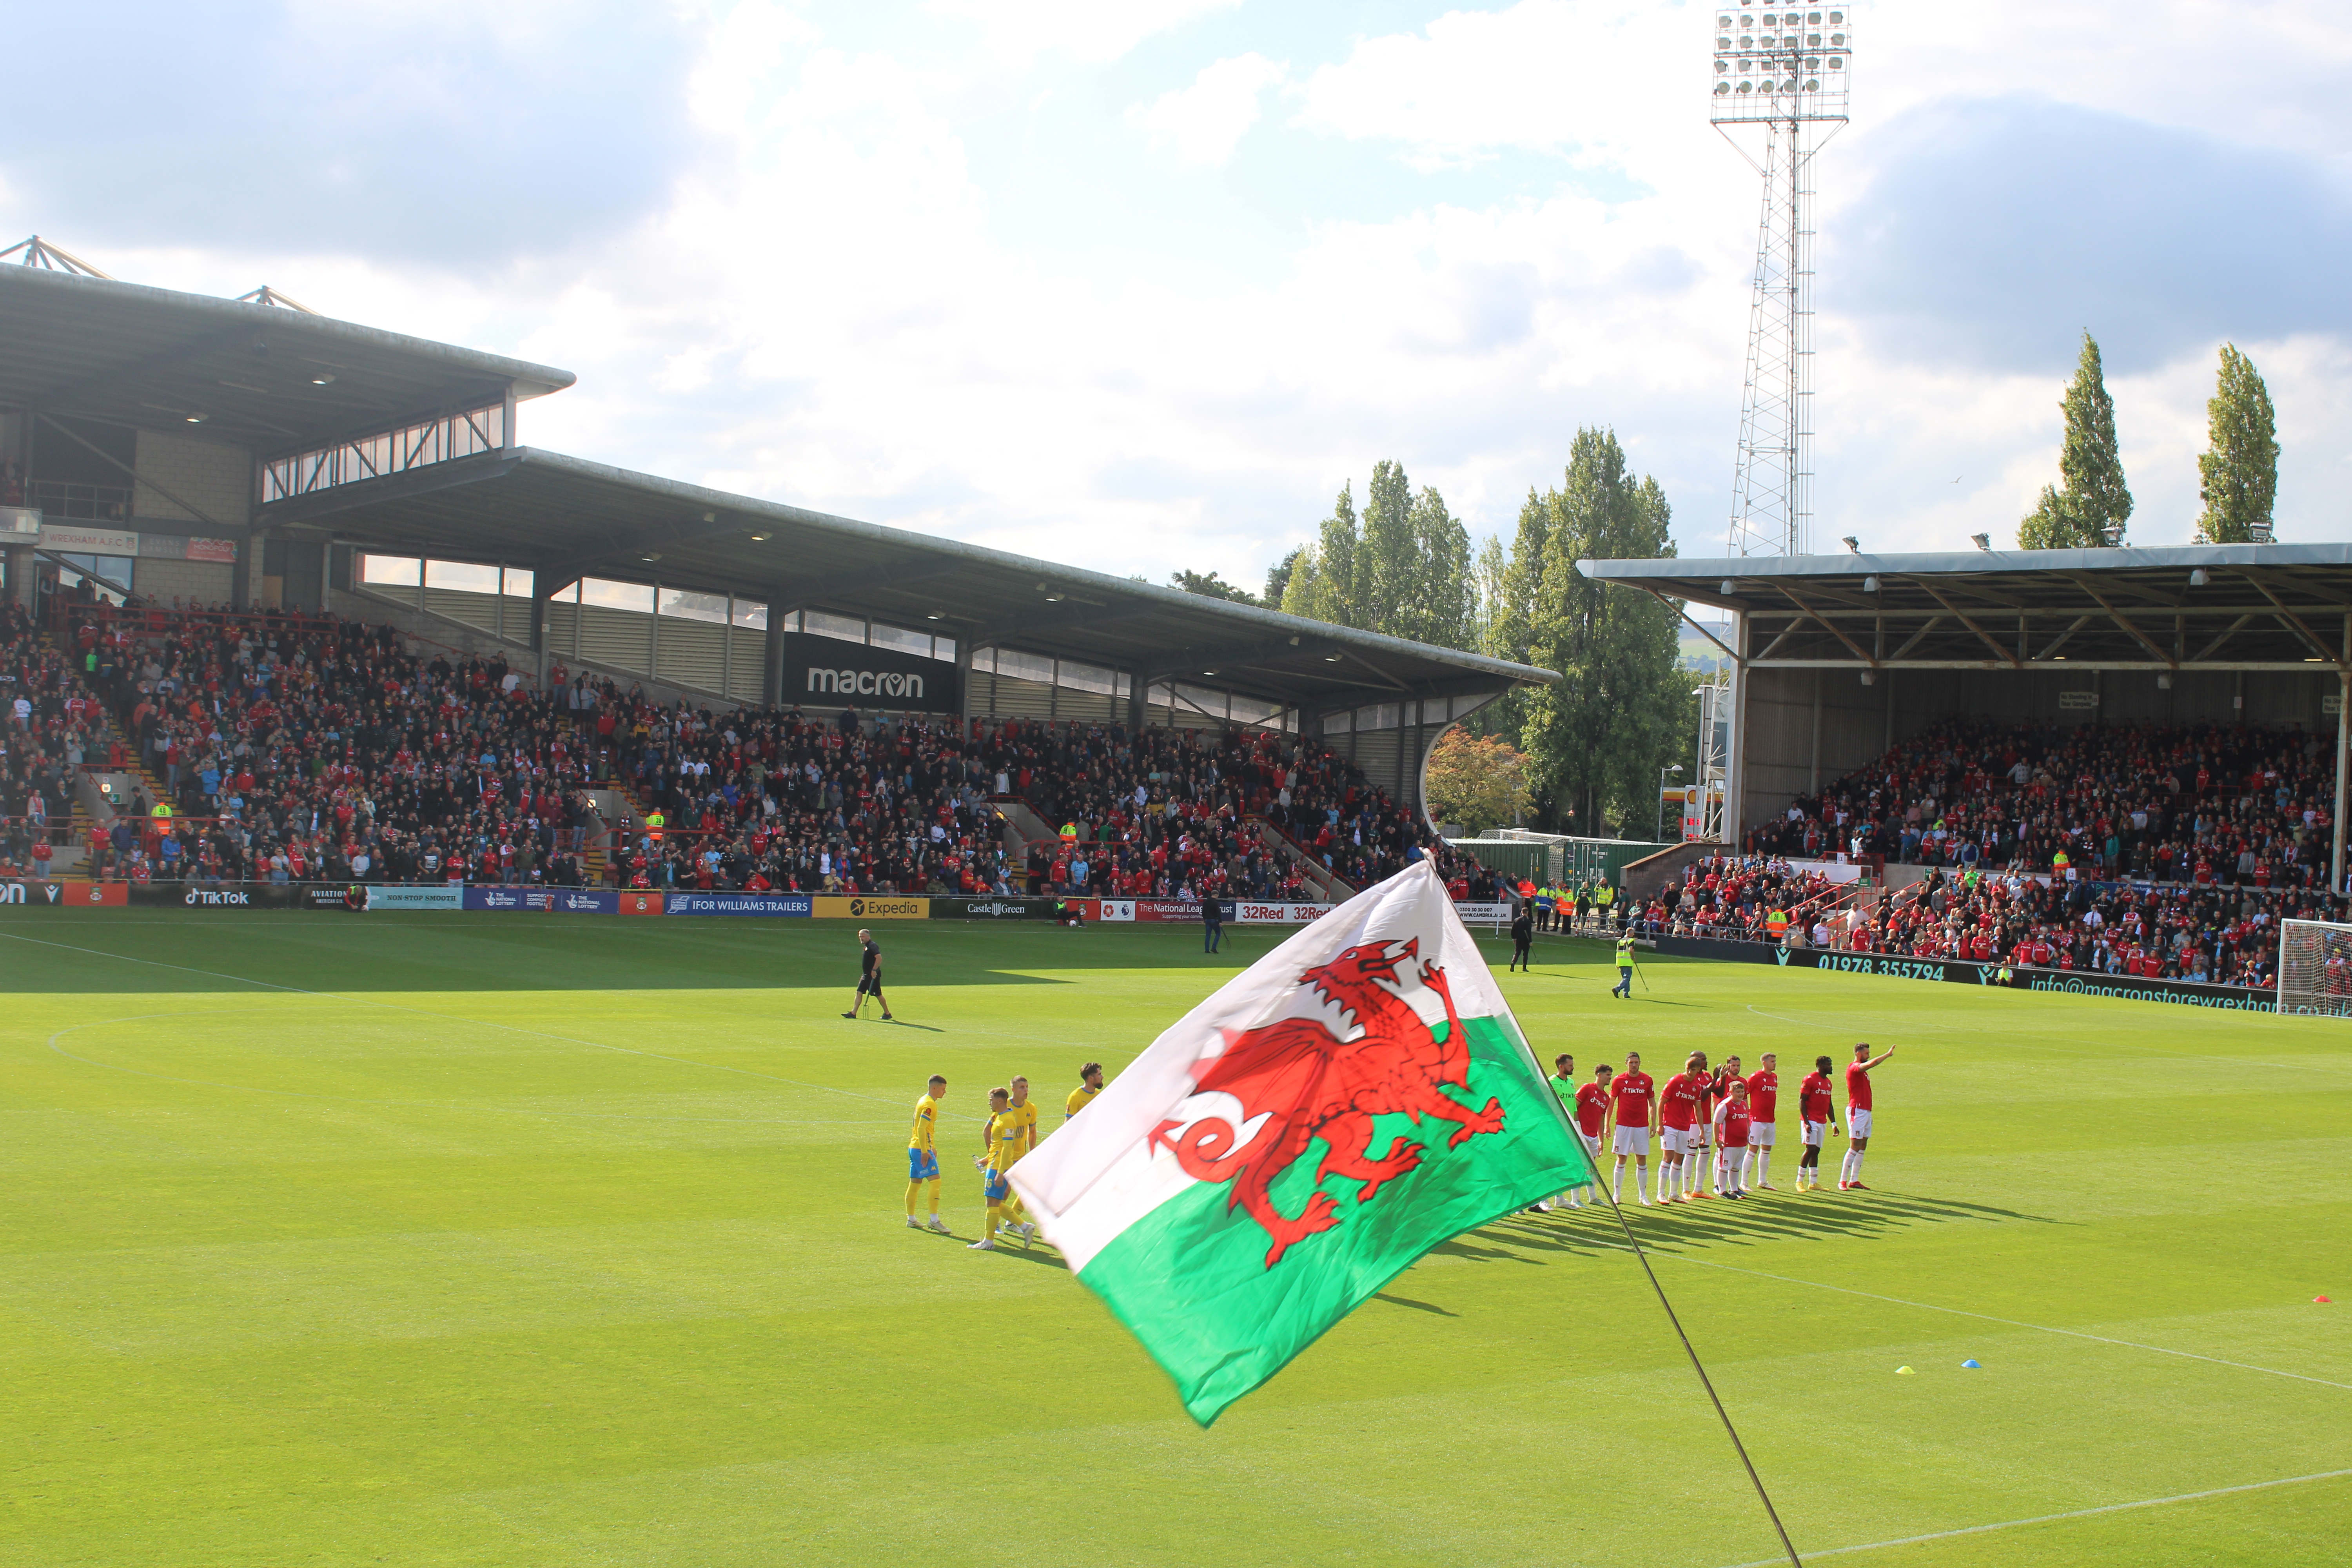 Wrexham soccer players on the pitch with a flag in front of them.